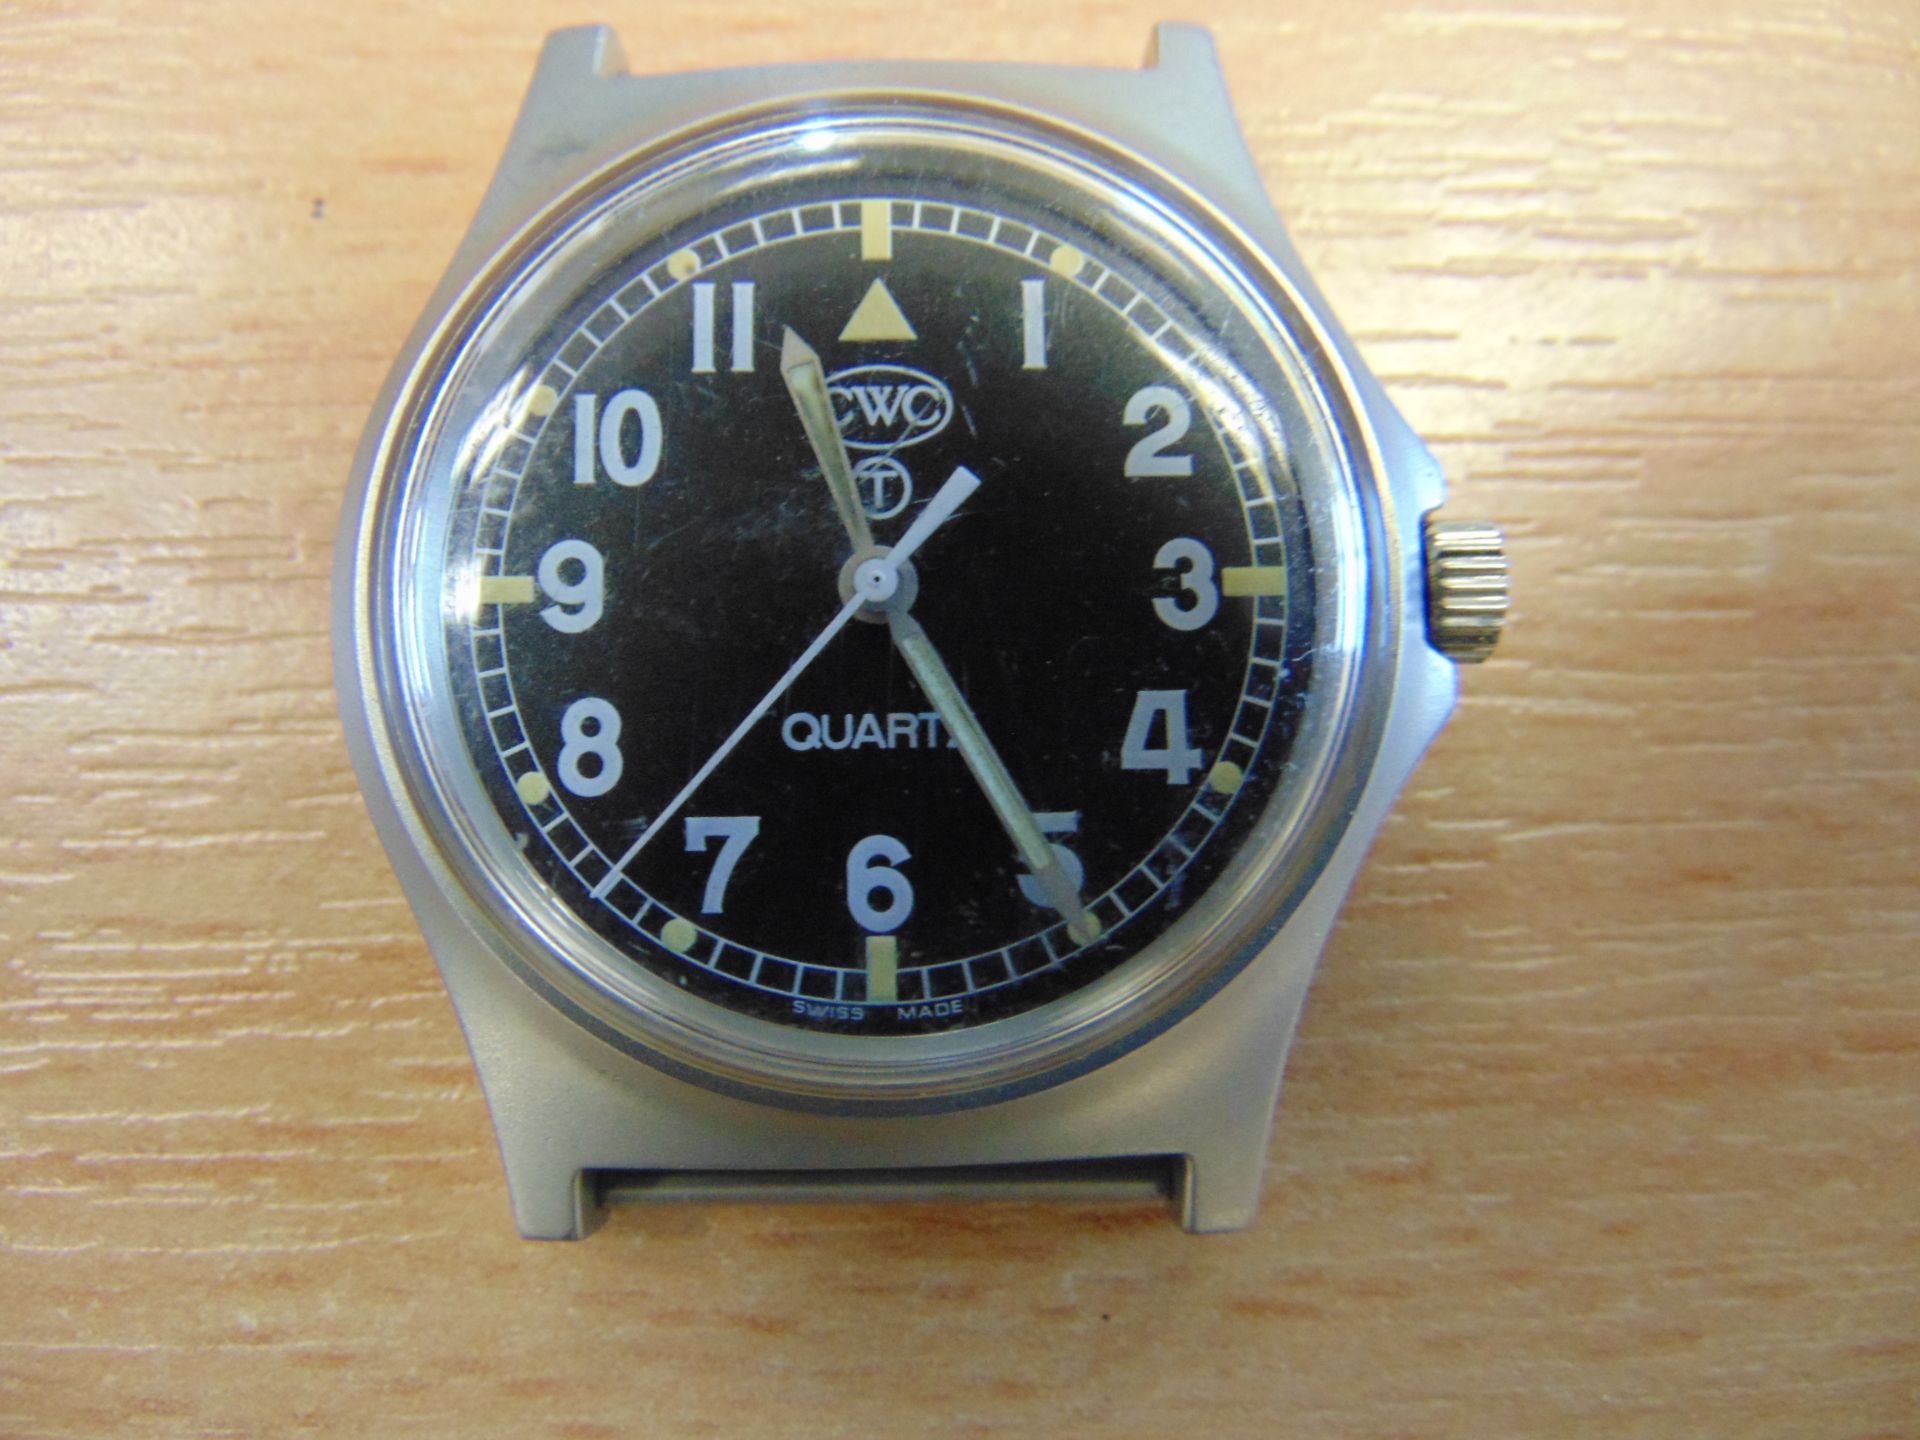 CWC (Cabot Watch Co Switzerland) British Army W10 Service Watch Nato Marks Water Resistant to 5ATM - Image 2 of 5